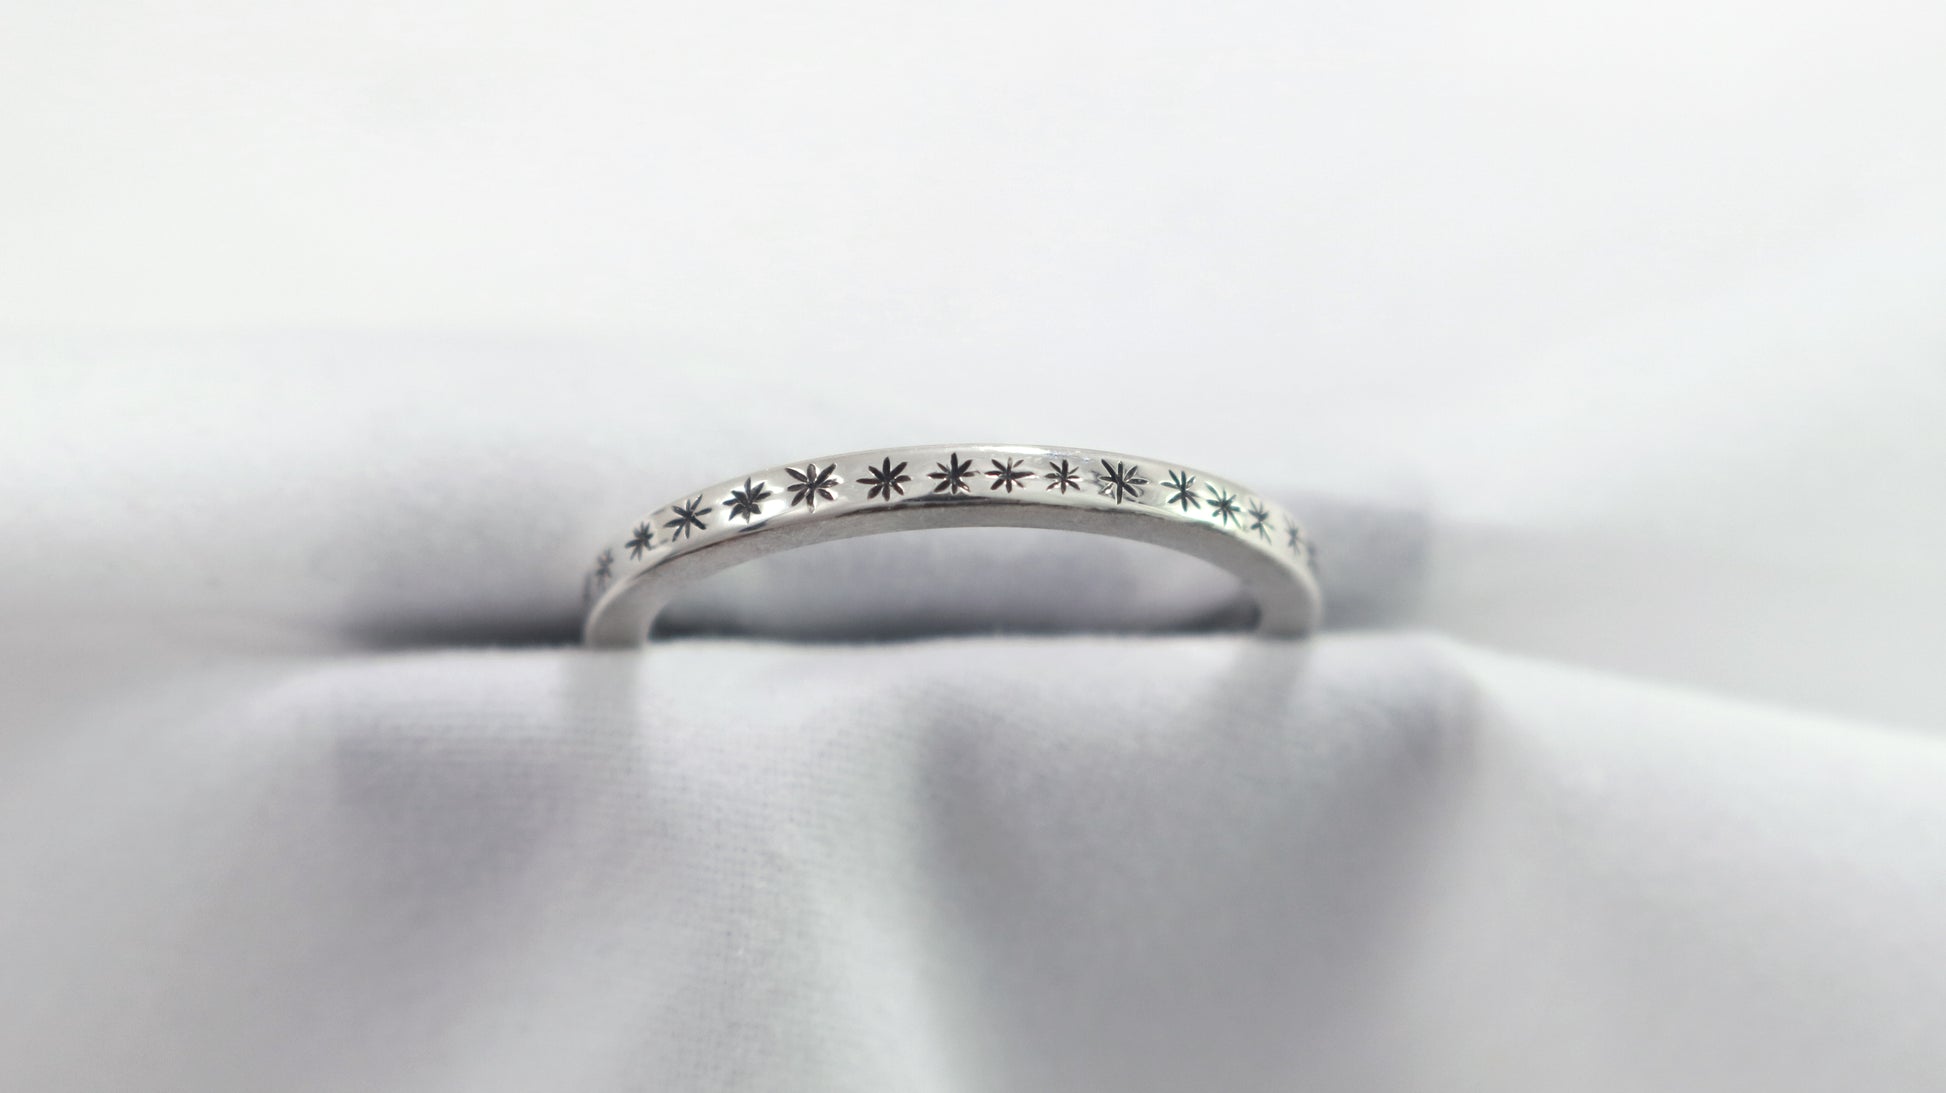 2mm squared ring band with black hand carved stars around the entire band.